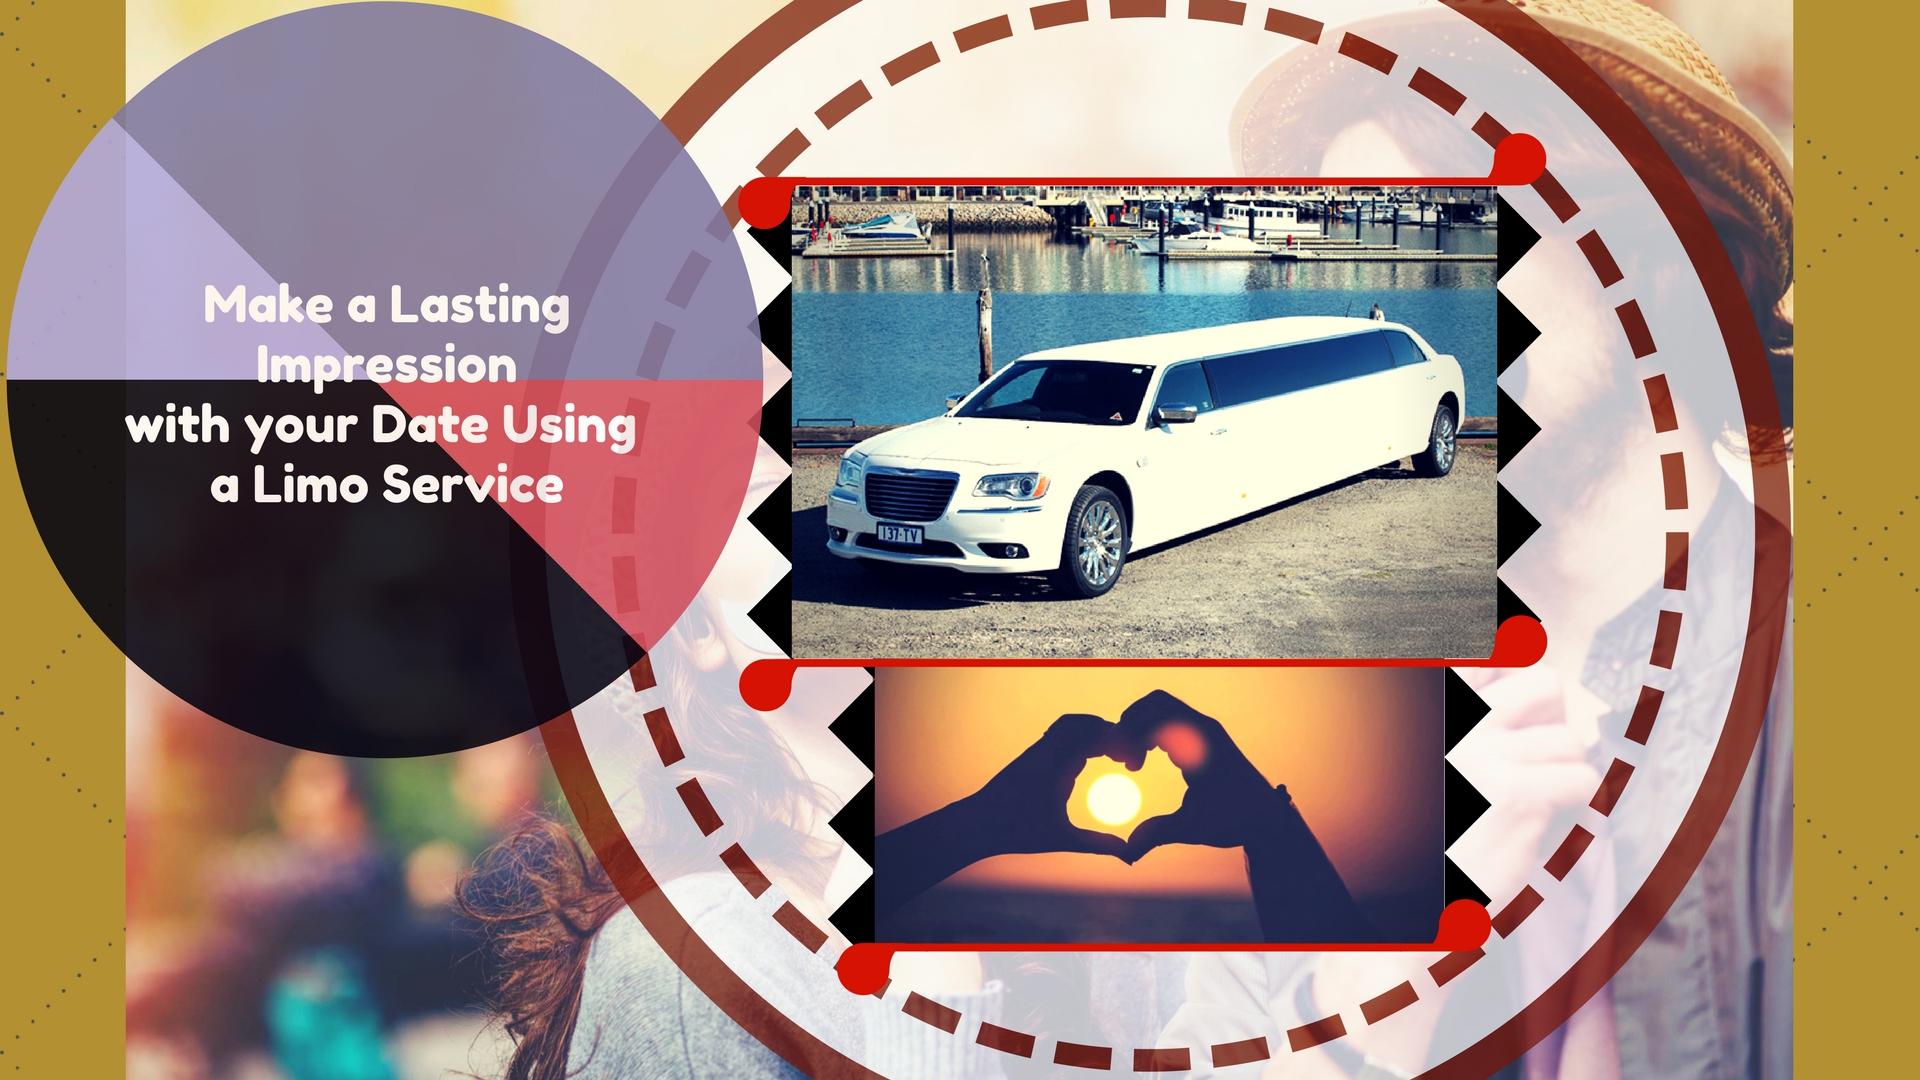 Make a Lasting Impression with Your Date Using a Limo Service 